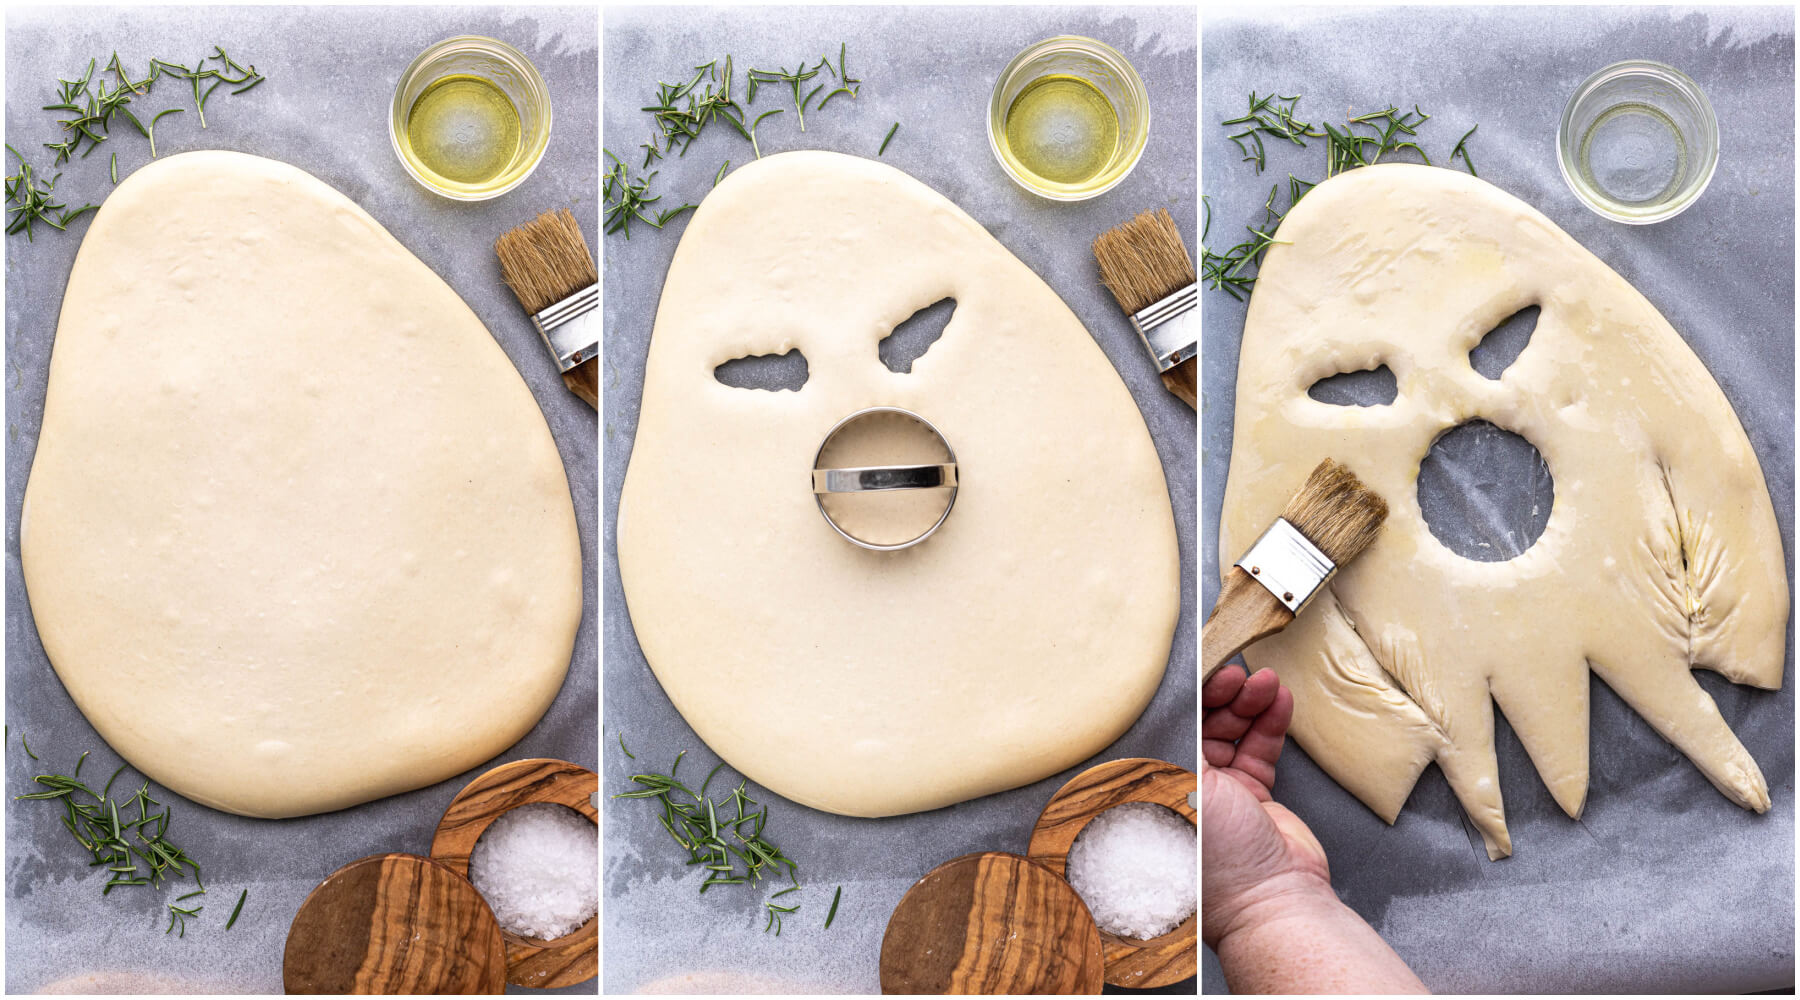 A series of process shots showing how to cut out a ghost face on rolled out fougasse dough.